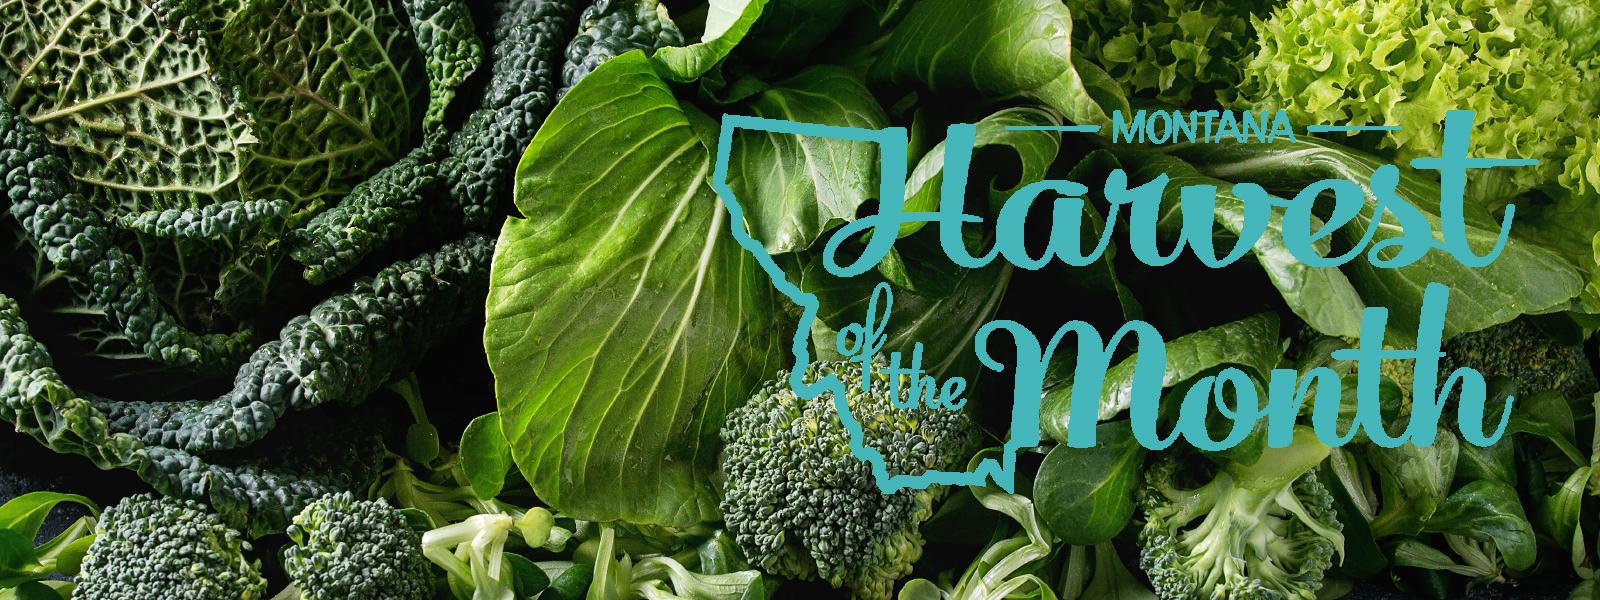 September's Montana Harvest of the Month food is Brassicas!